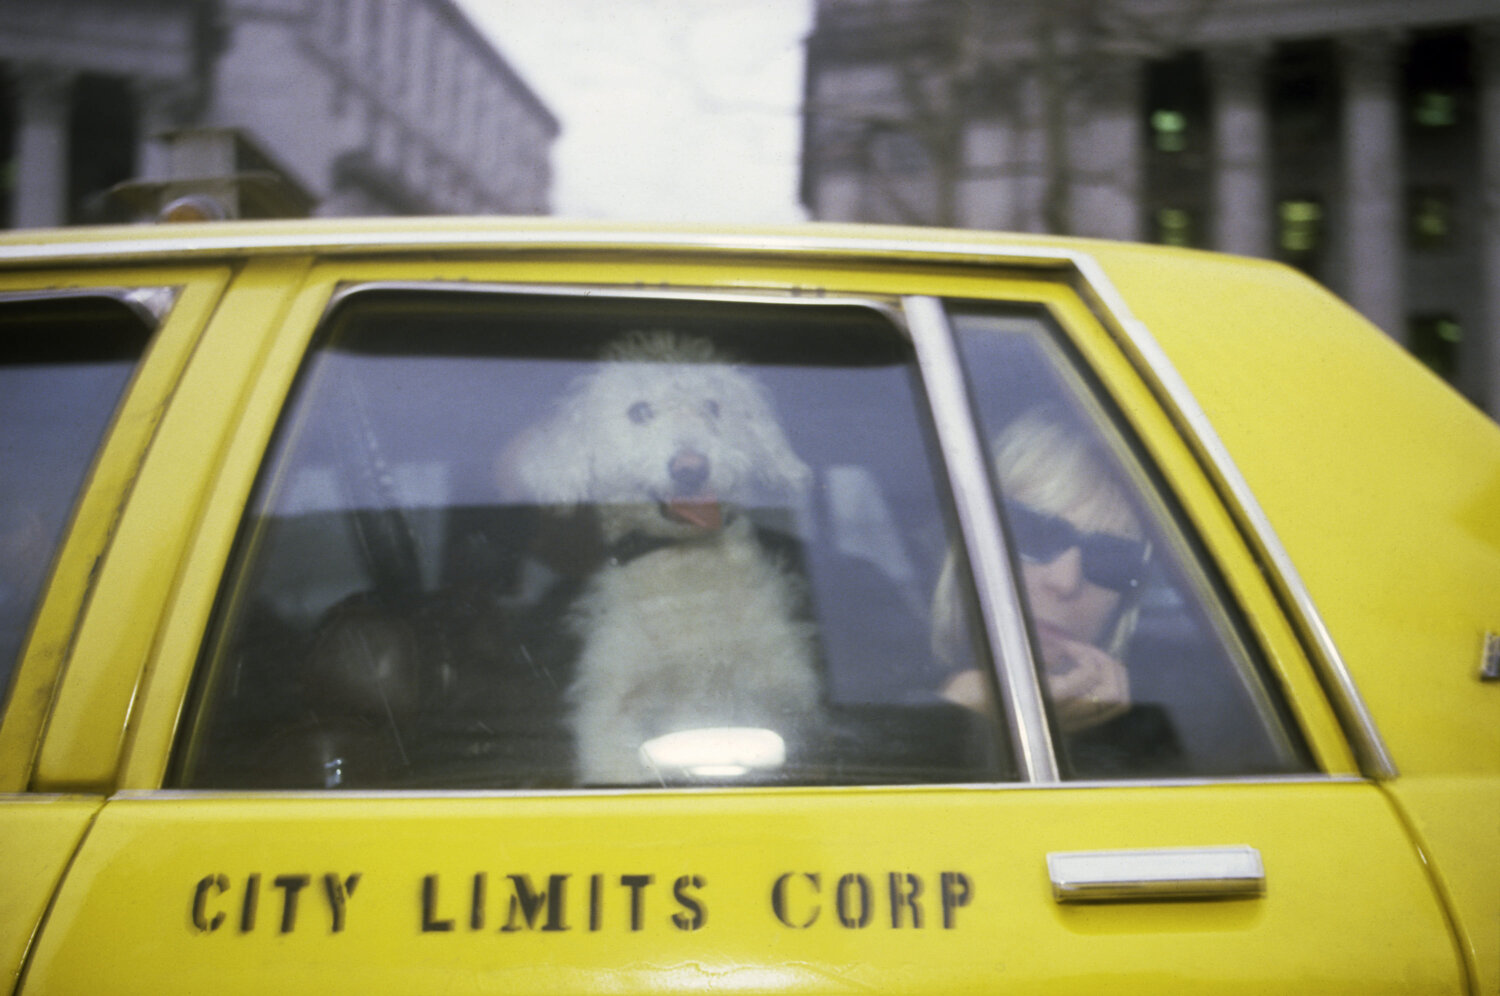 teri with her dog in a taxi new york 1987 Nan Goldin Stedelijk Museum gallerytalk